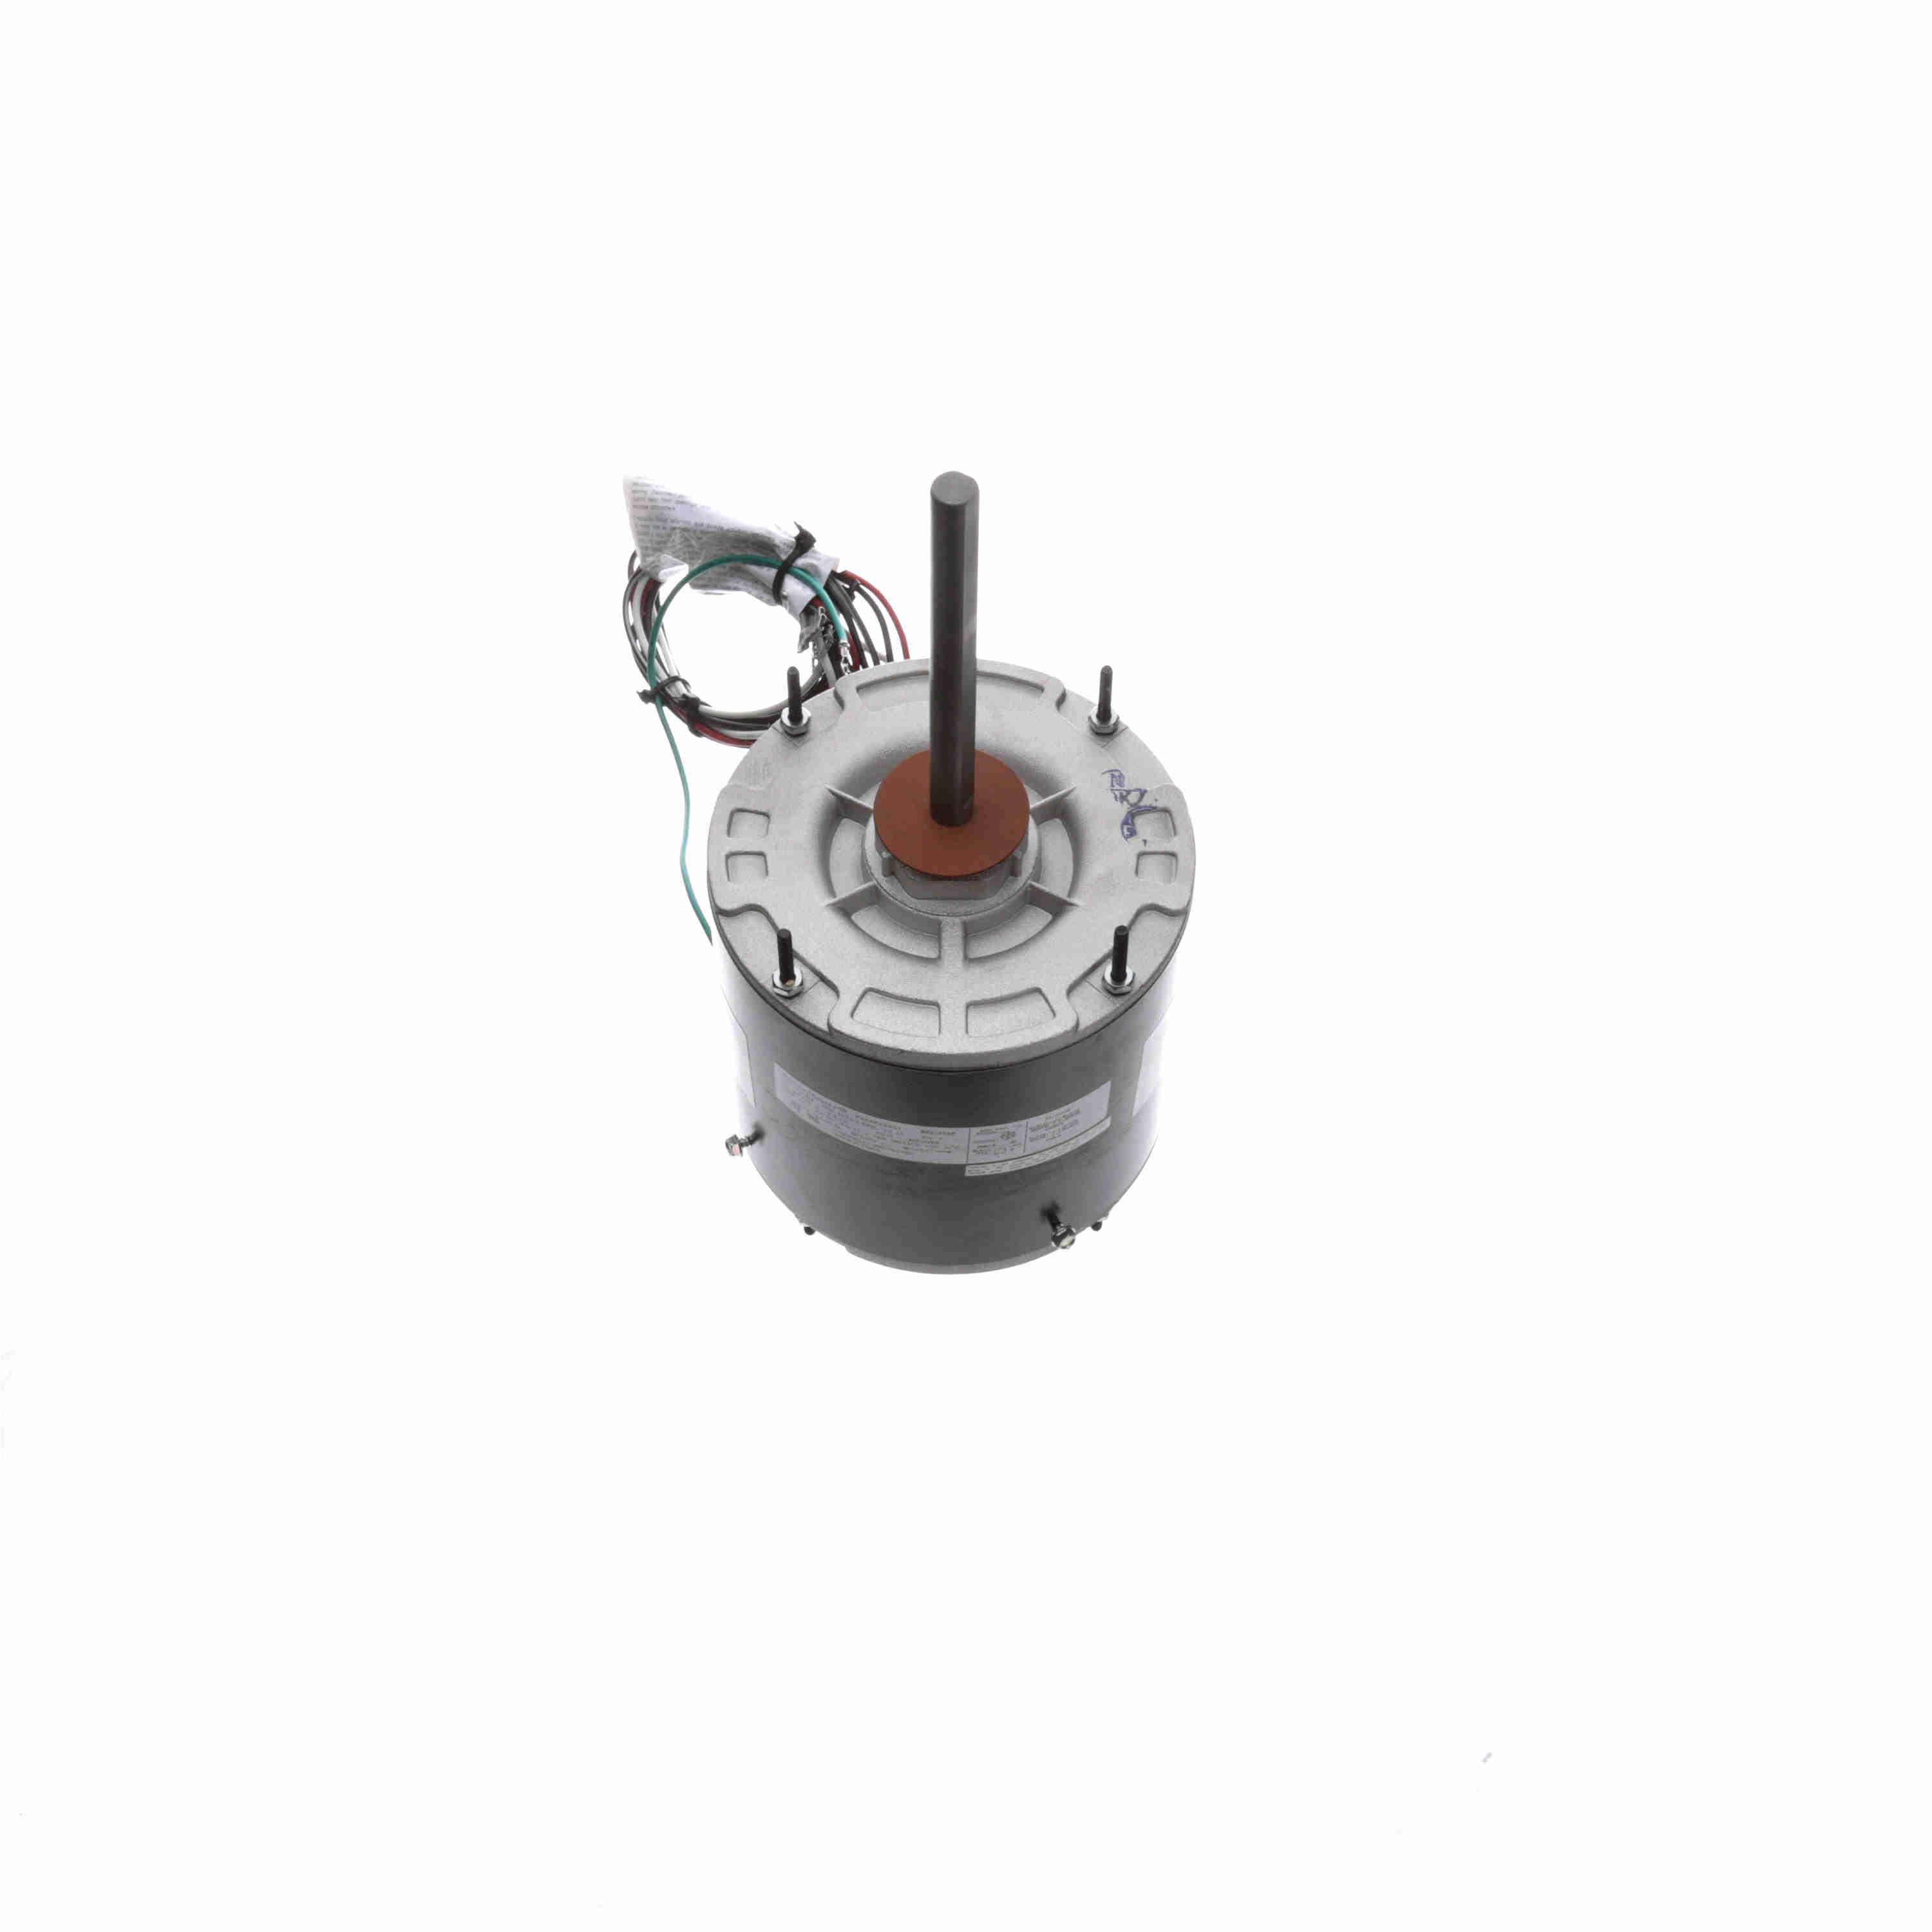 Century® EM3468F 6-Pole HVAC/R Motor, Totally Enclosed Air Over Enclosure, 1/2, 1/4 hp, 208 to 230 V, 60 Hz, 1 Phase, 48Y Frame, 1075 rpm Speed, Extended Stud Mount